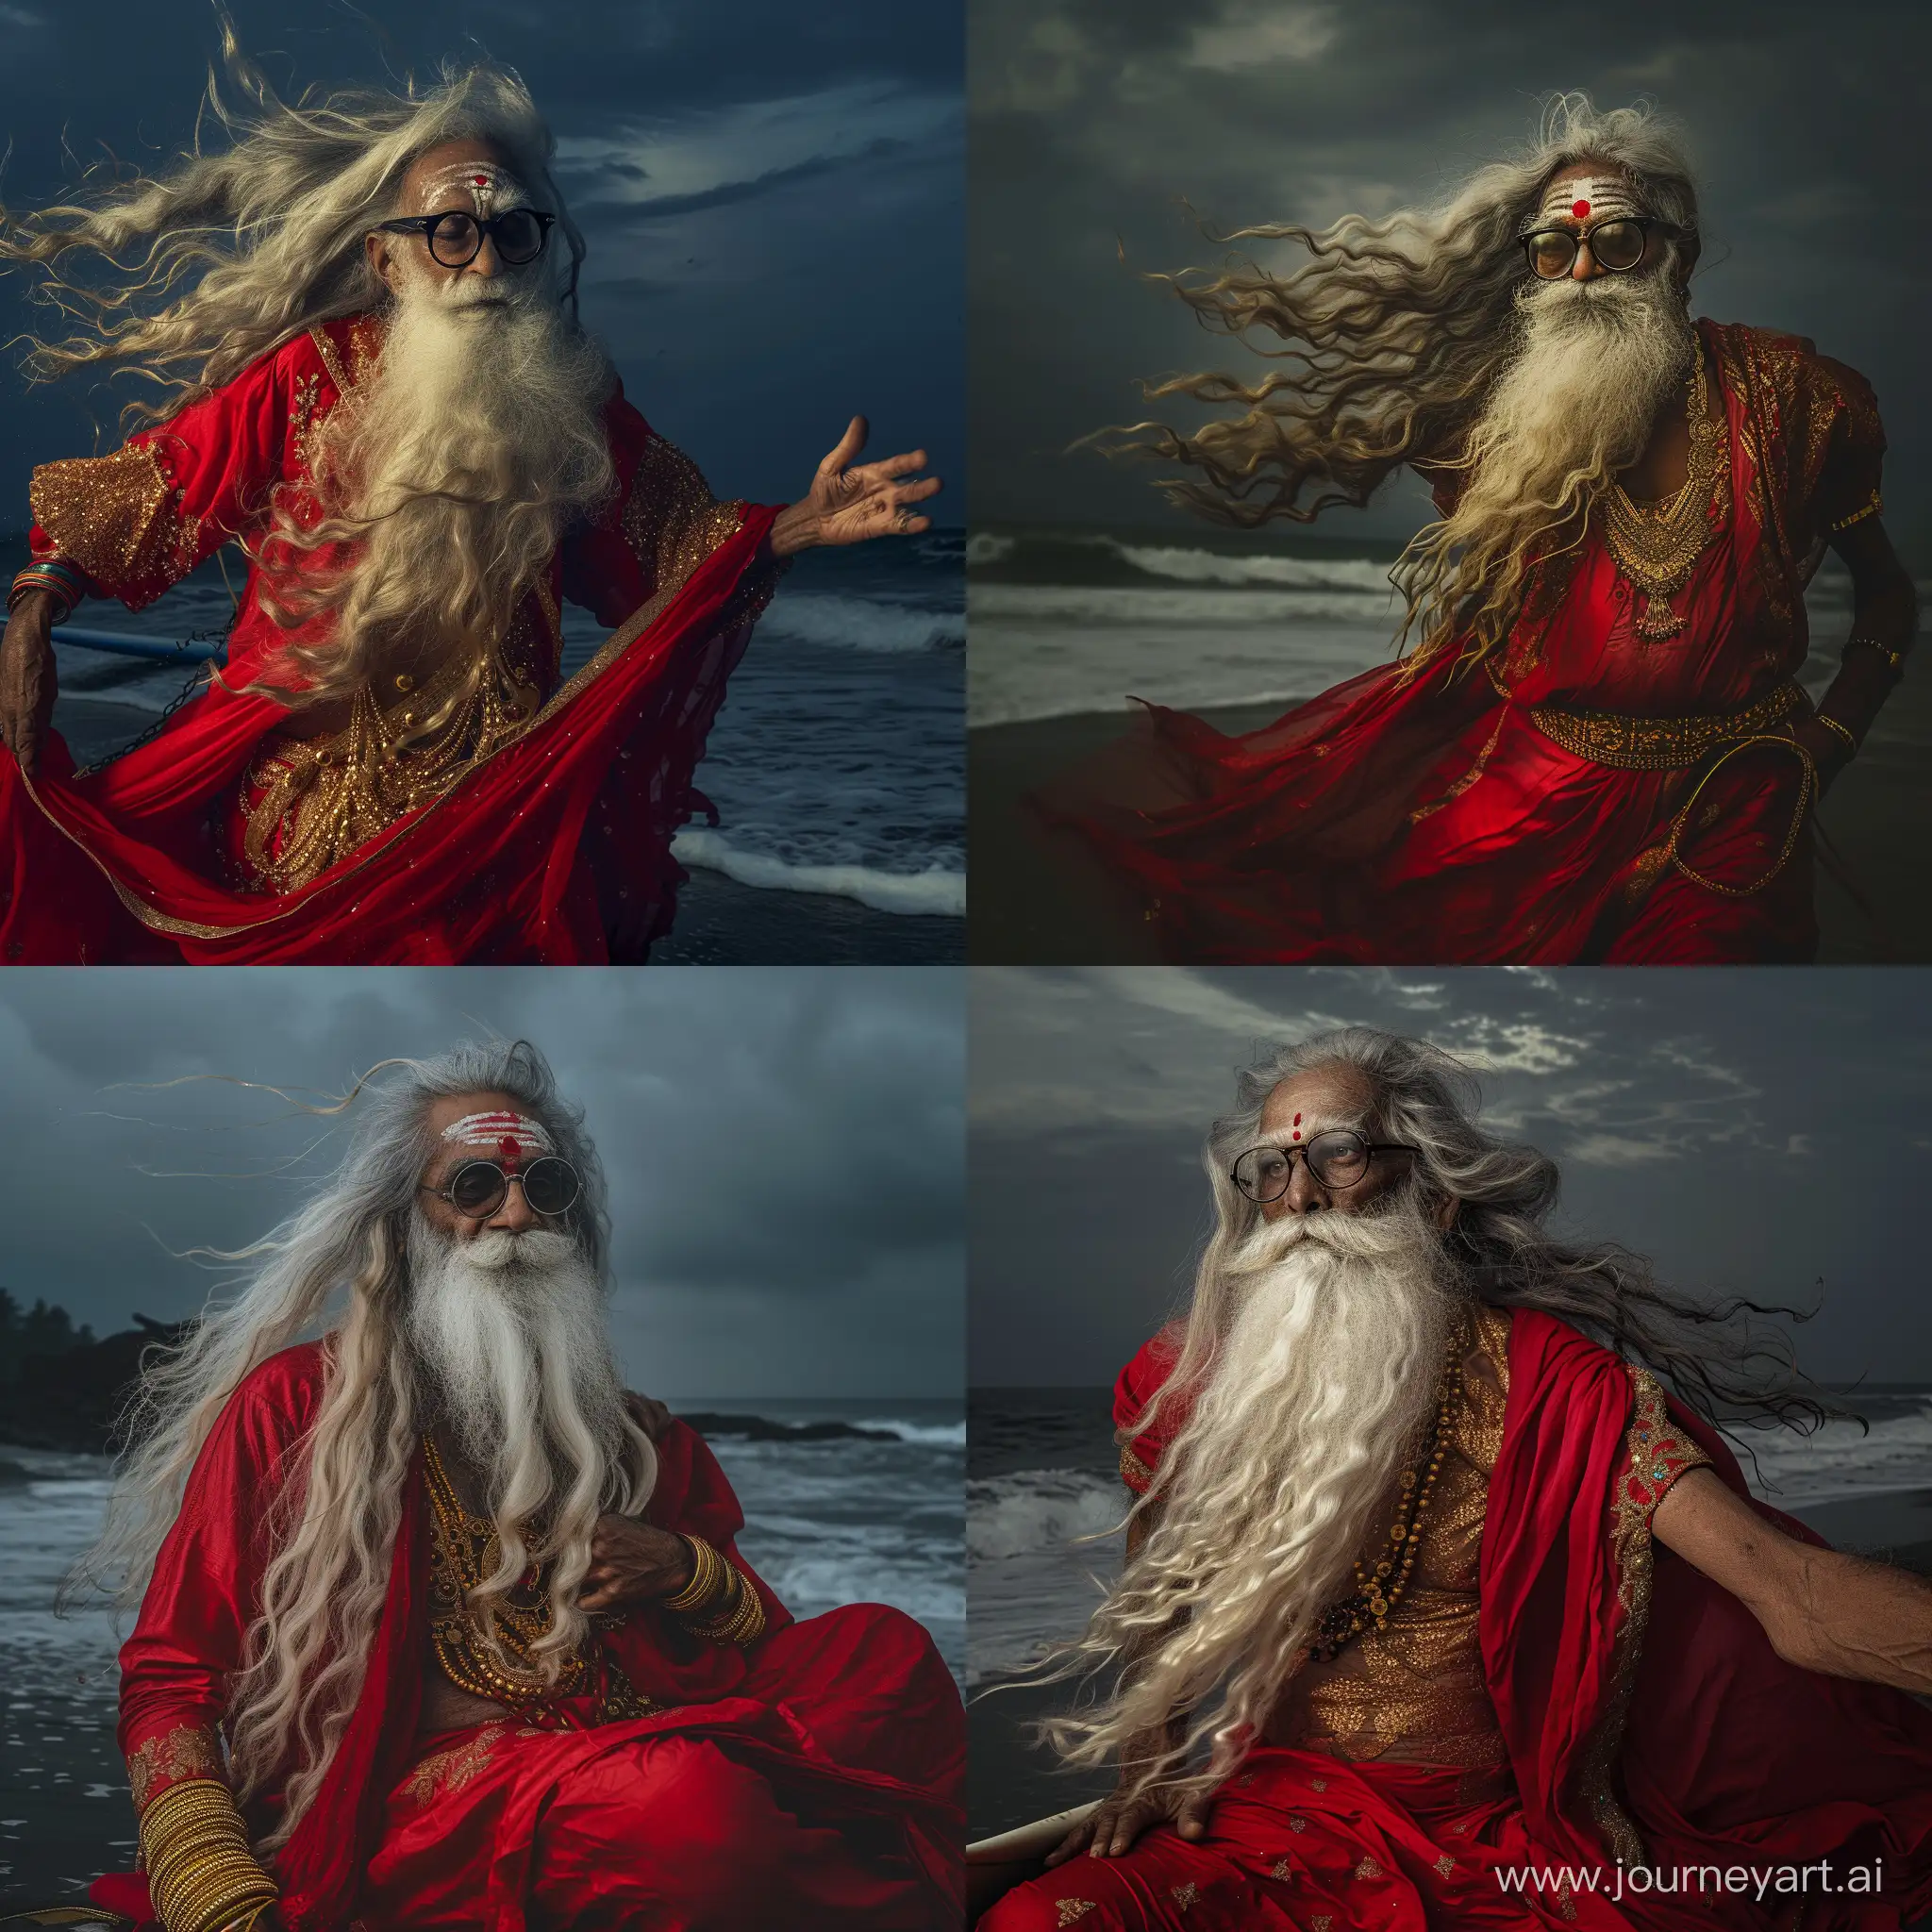 Bohemian-Surfer-Old-Hippie-in-Red-Dress-Riding-the-Waves-with-Fuji-XT4-Camera